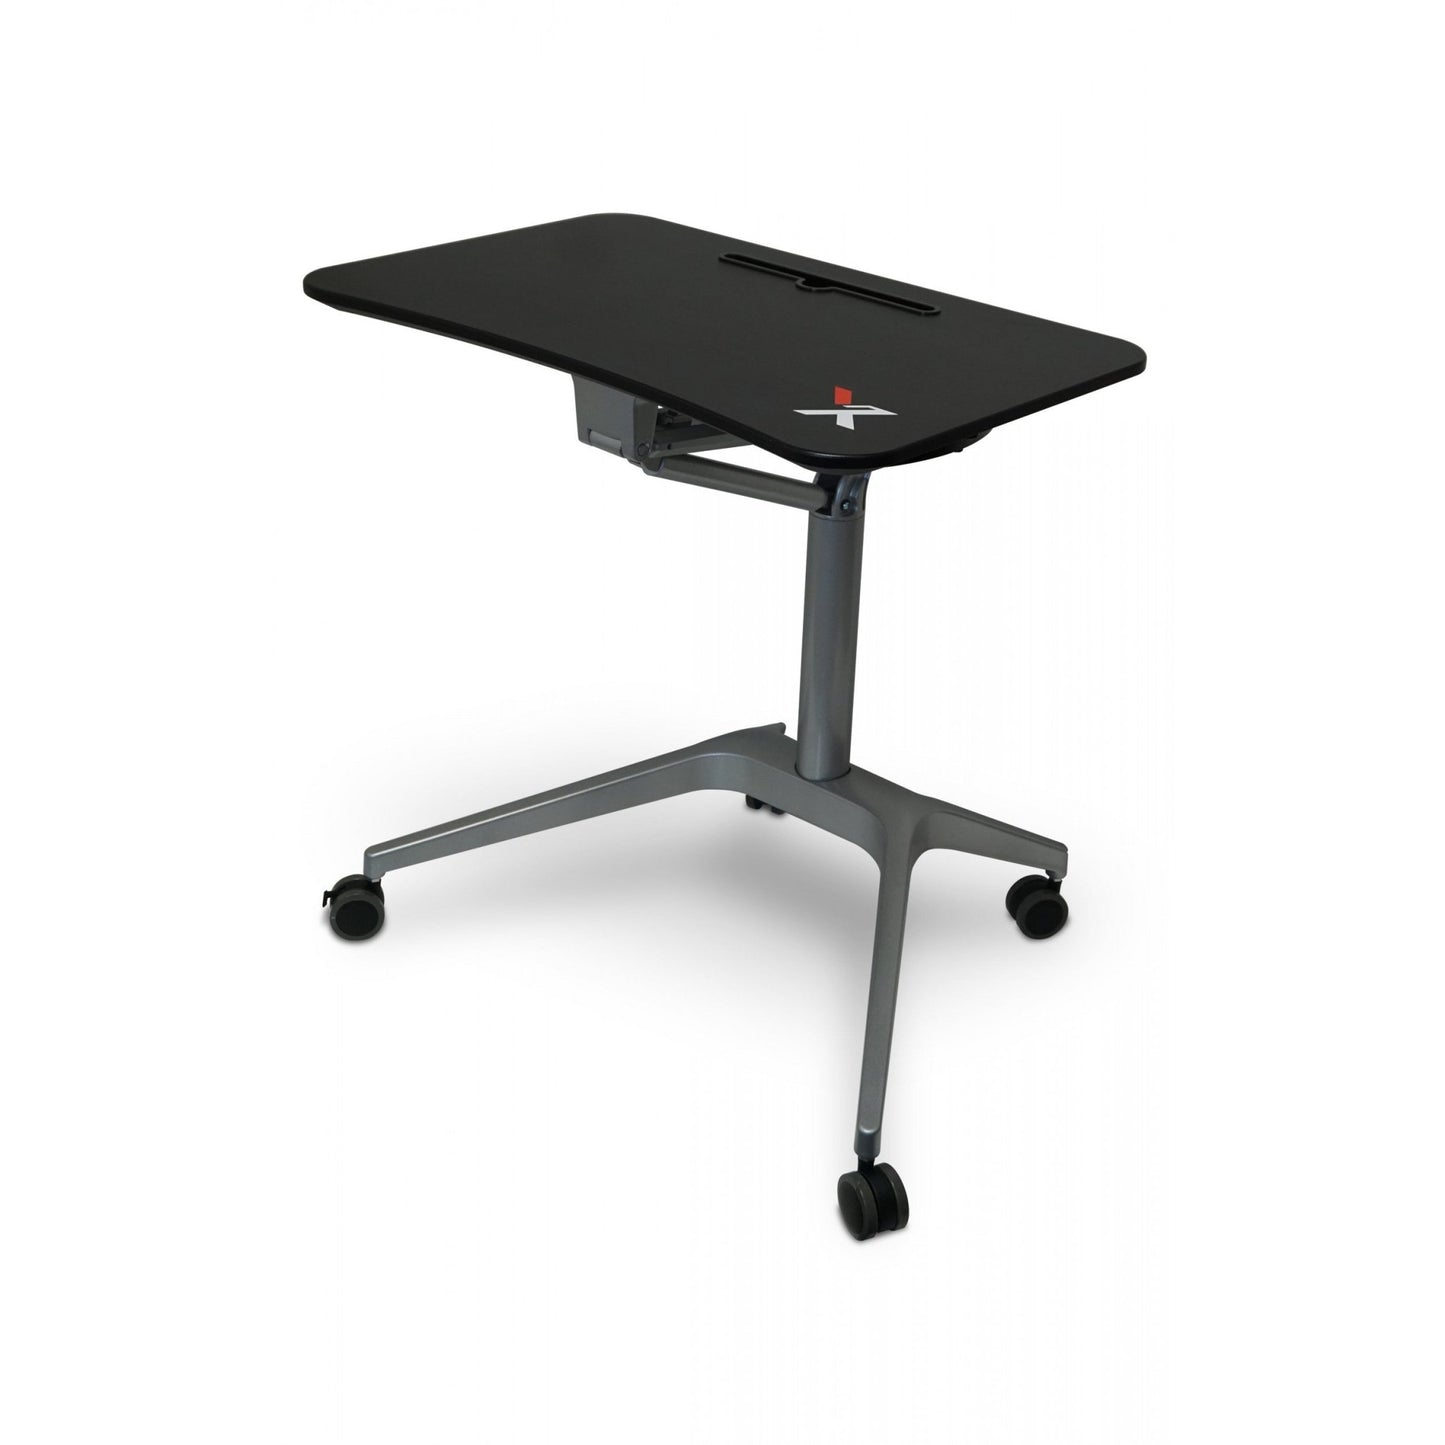 X-Table Mobile Height Adjustable Desk by XChair - Wholesale Office Furniture